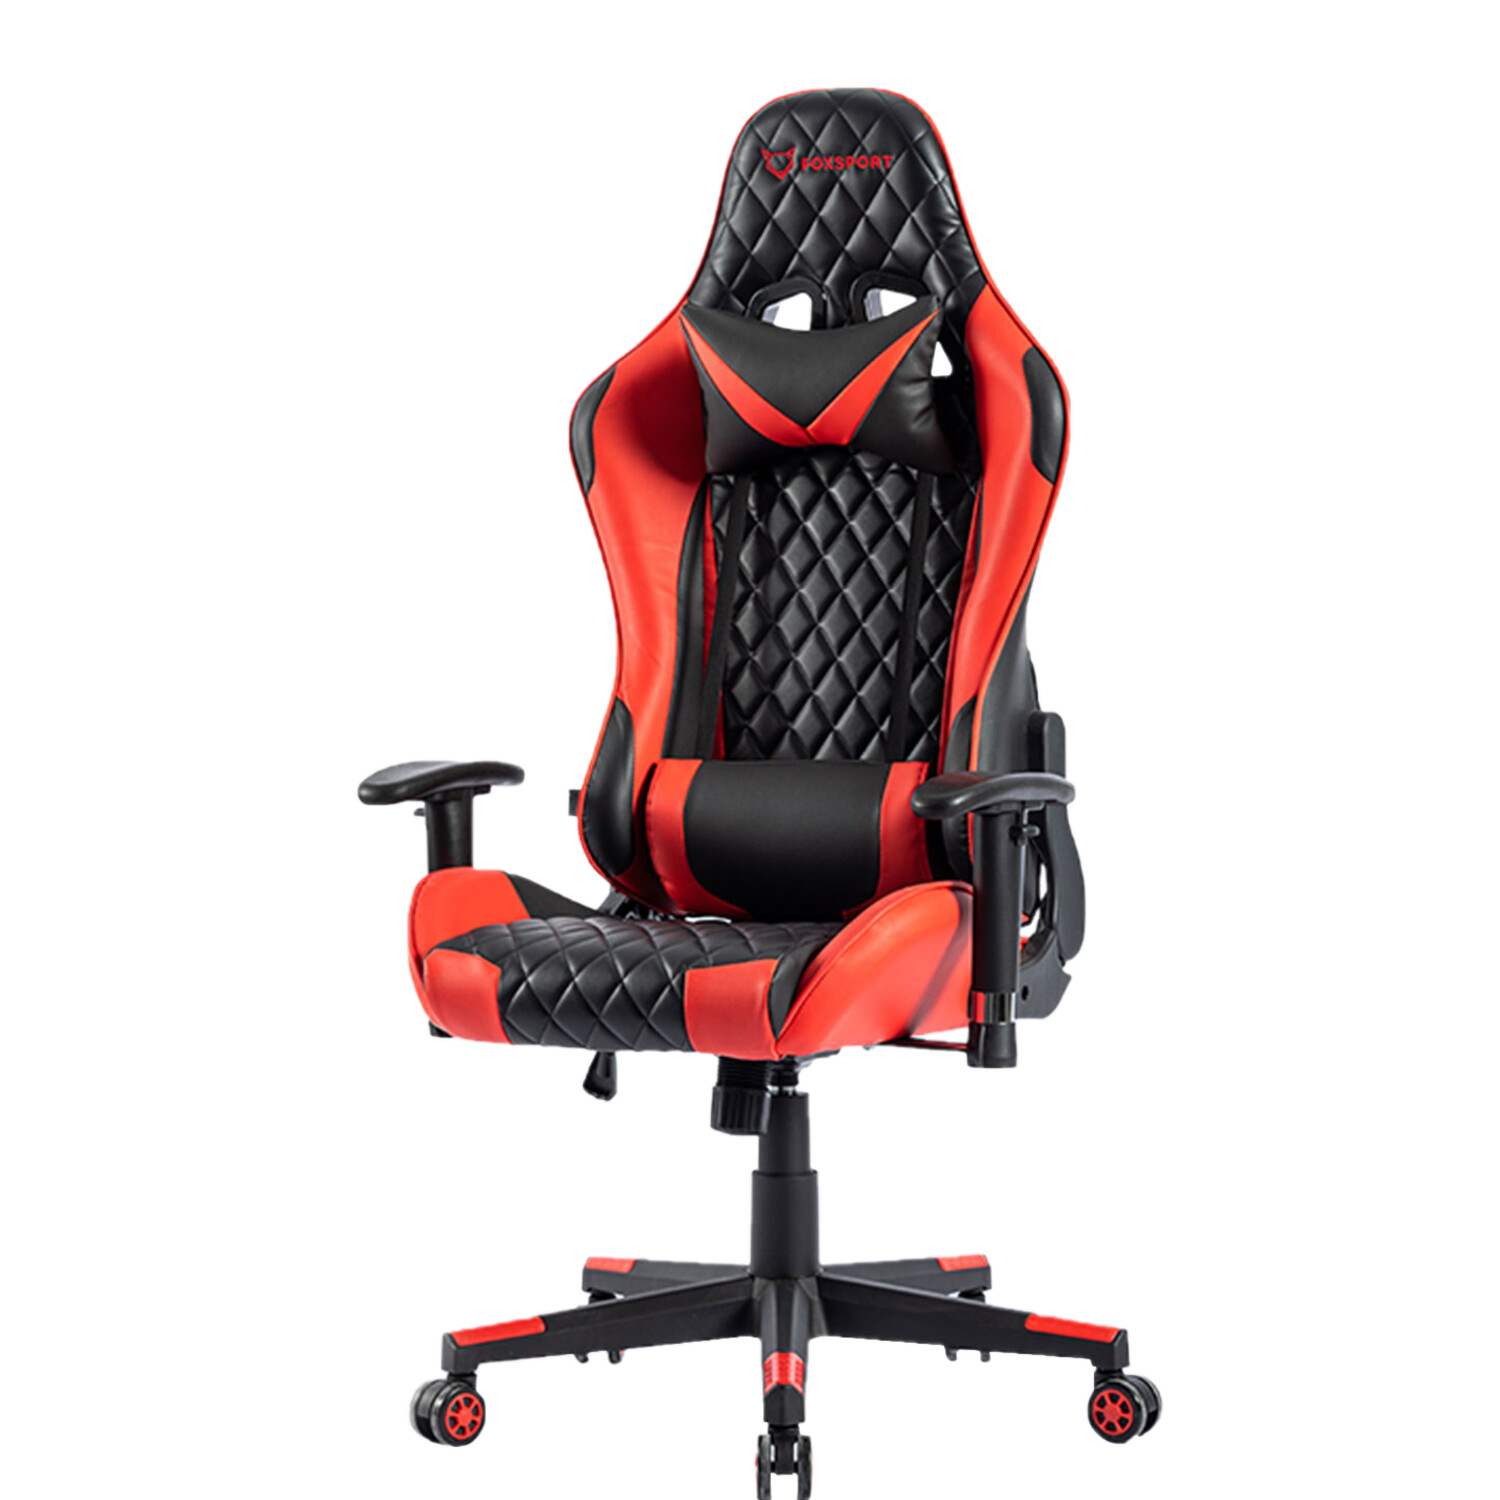 FOXSPORT Gaming Chair ab 129,99 €